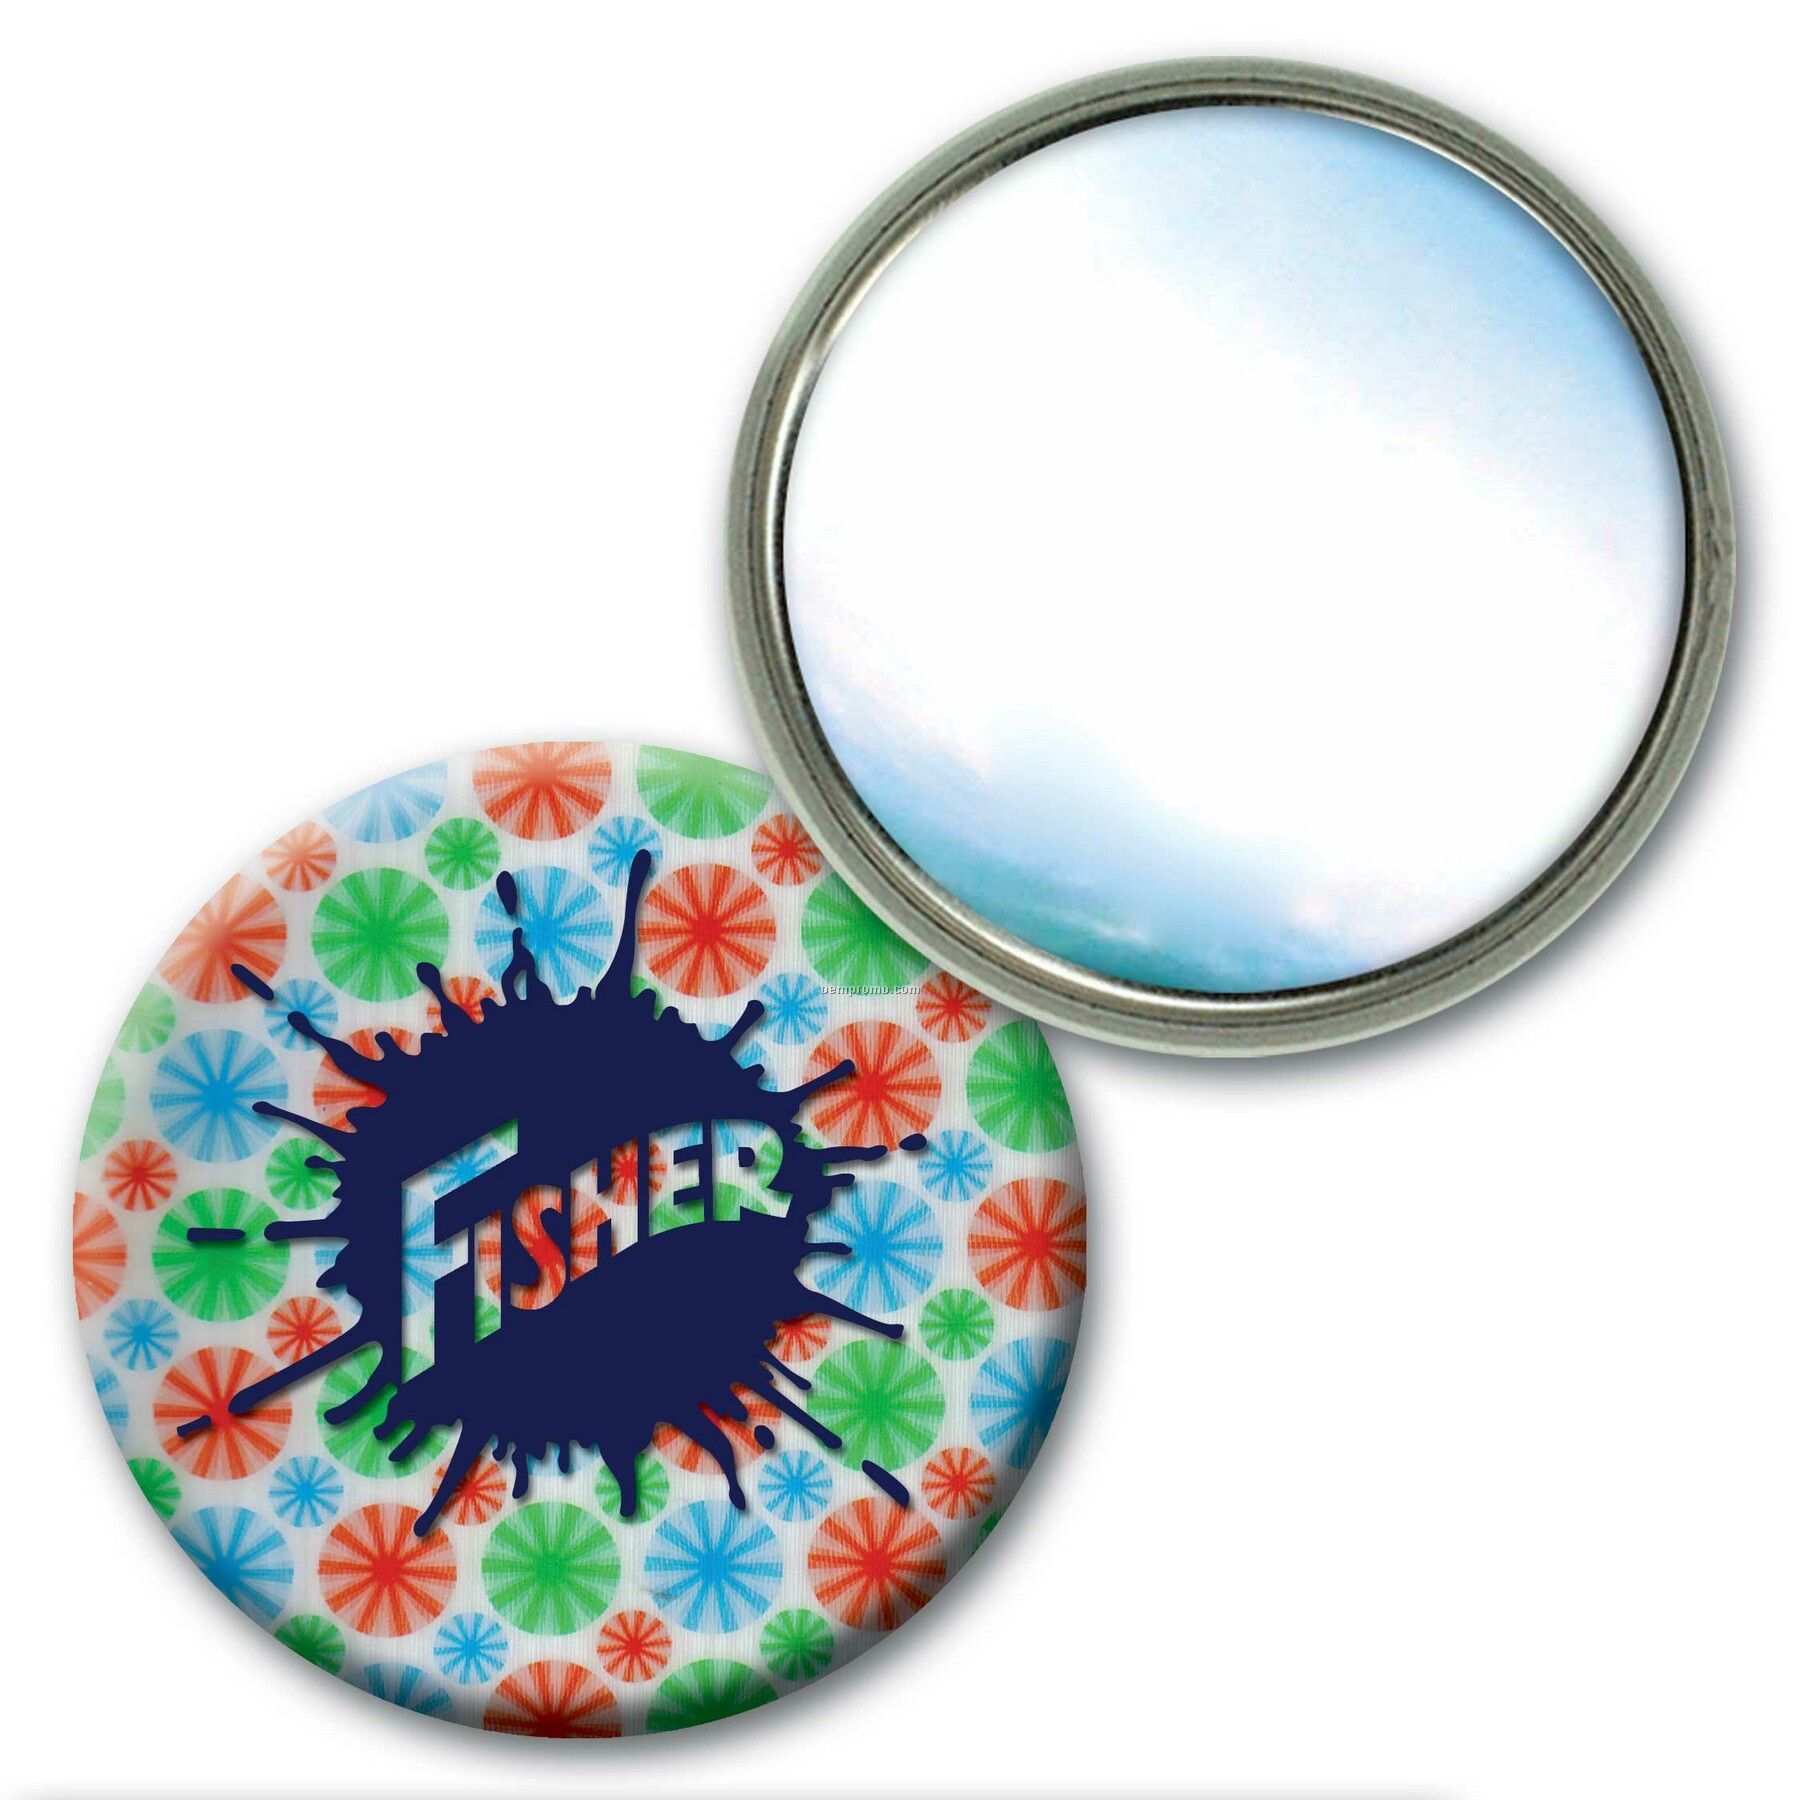 Compact Mirror Lenticular Animated Wheels Effect (Imprinted)